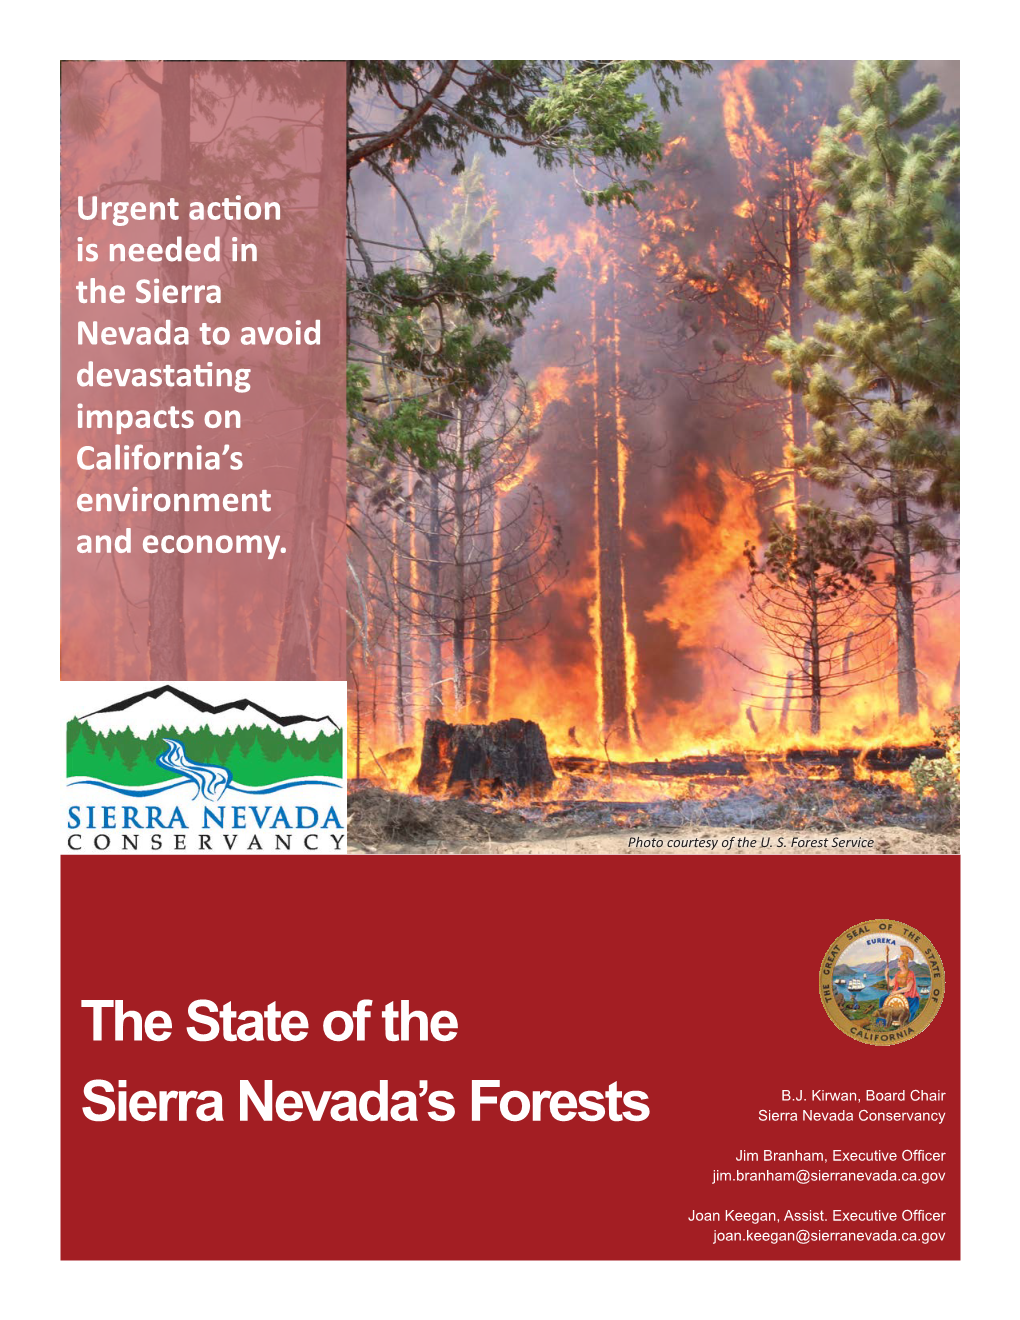 The State of the Sierra Nevada's Forests Report